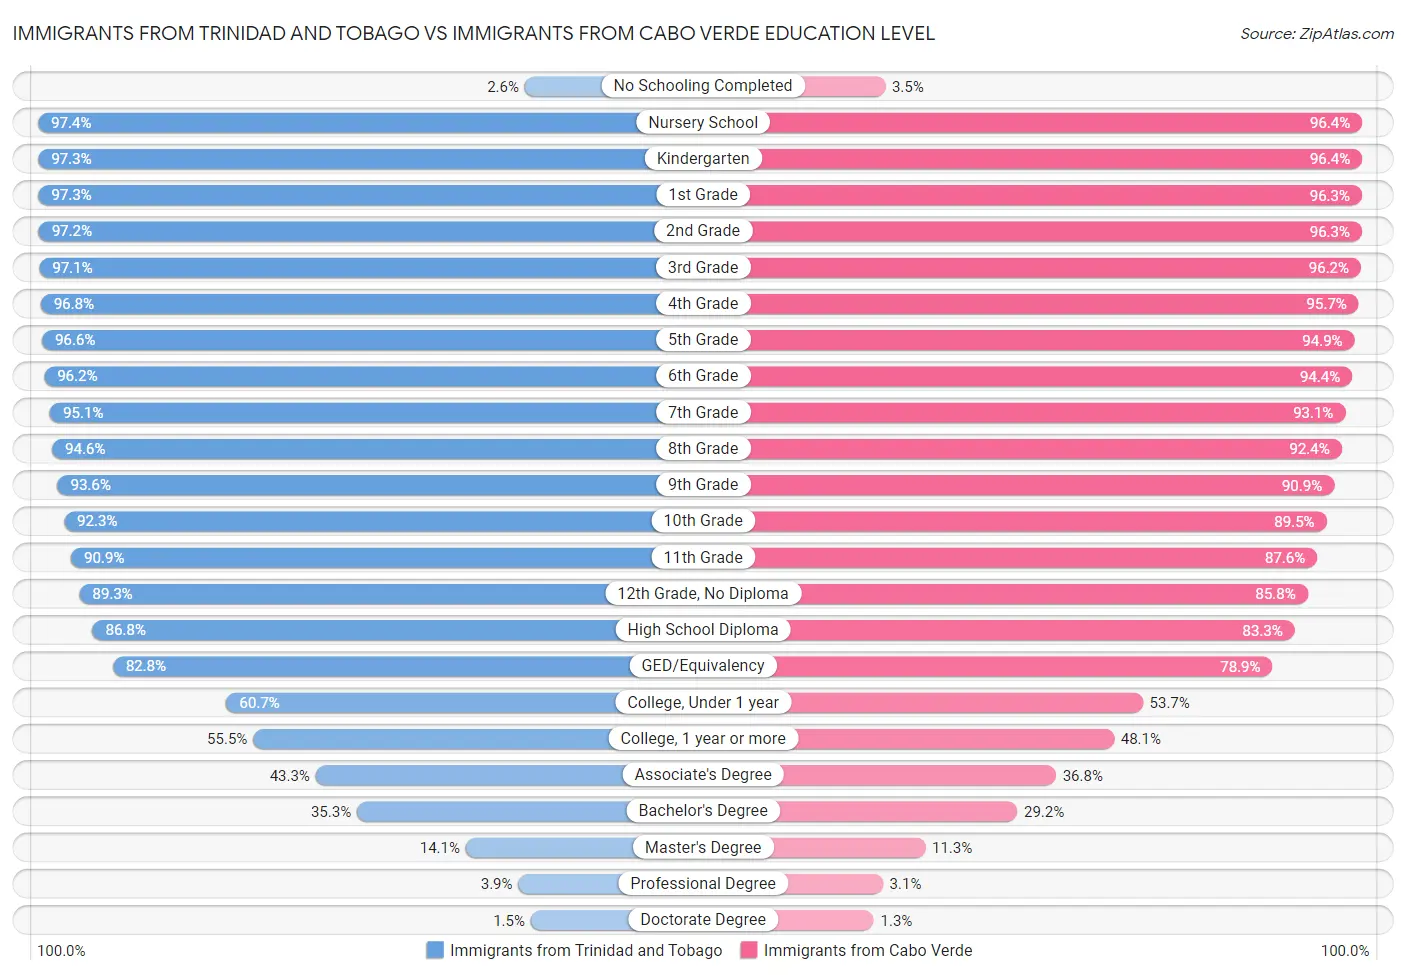 Immigrants from Trinidad and Tobago vs Immigrants from Cabo Verde Education Level